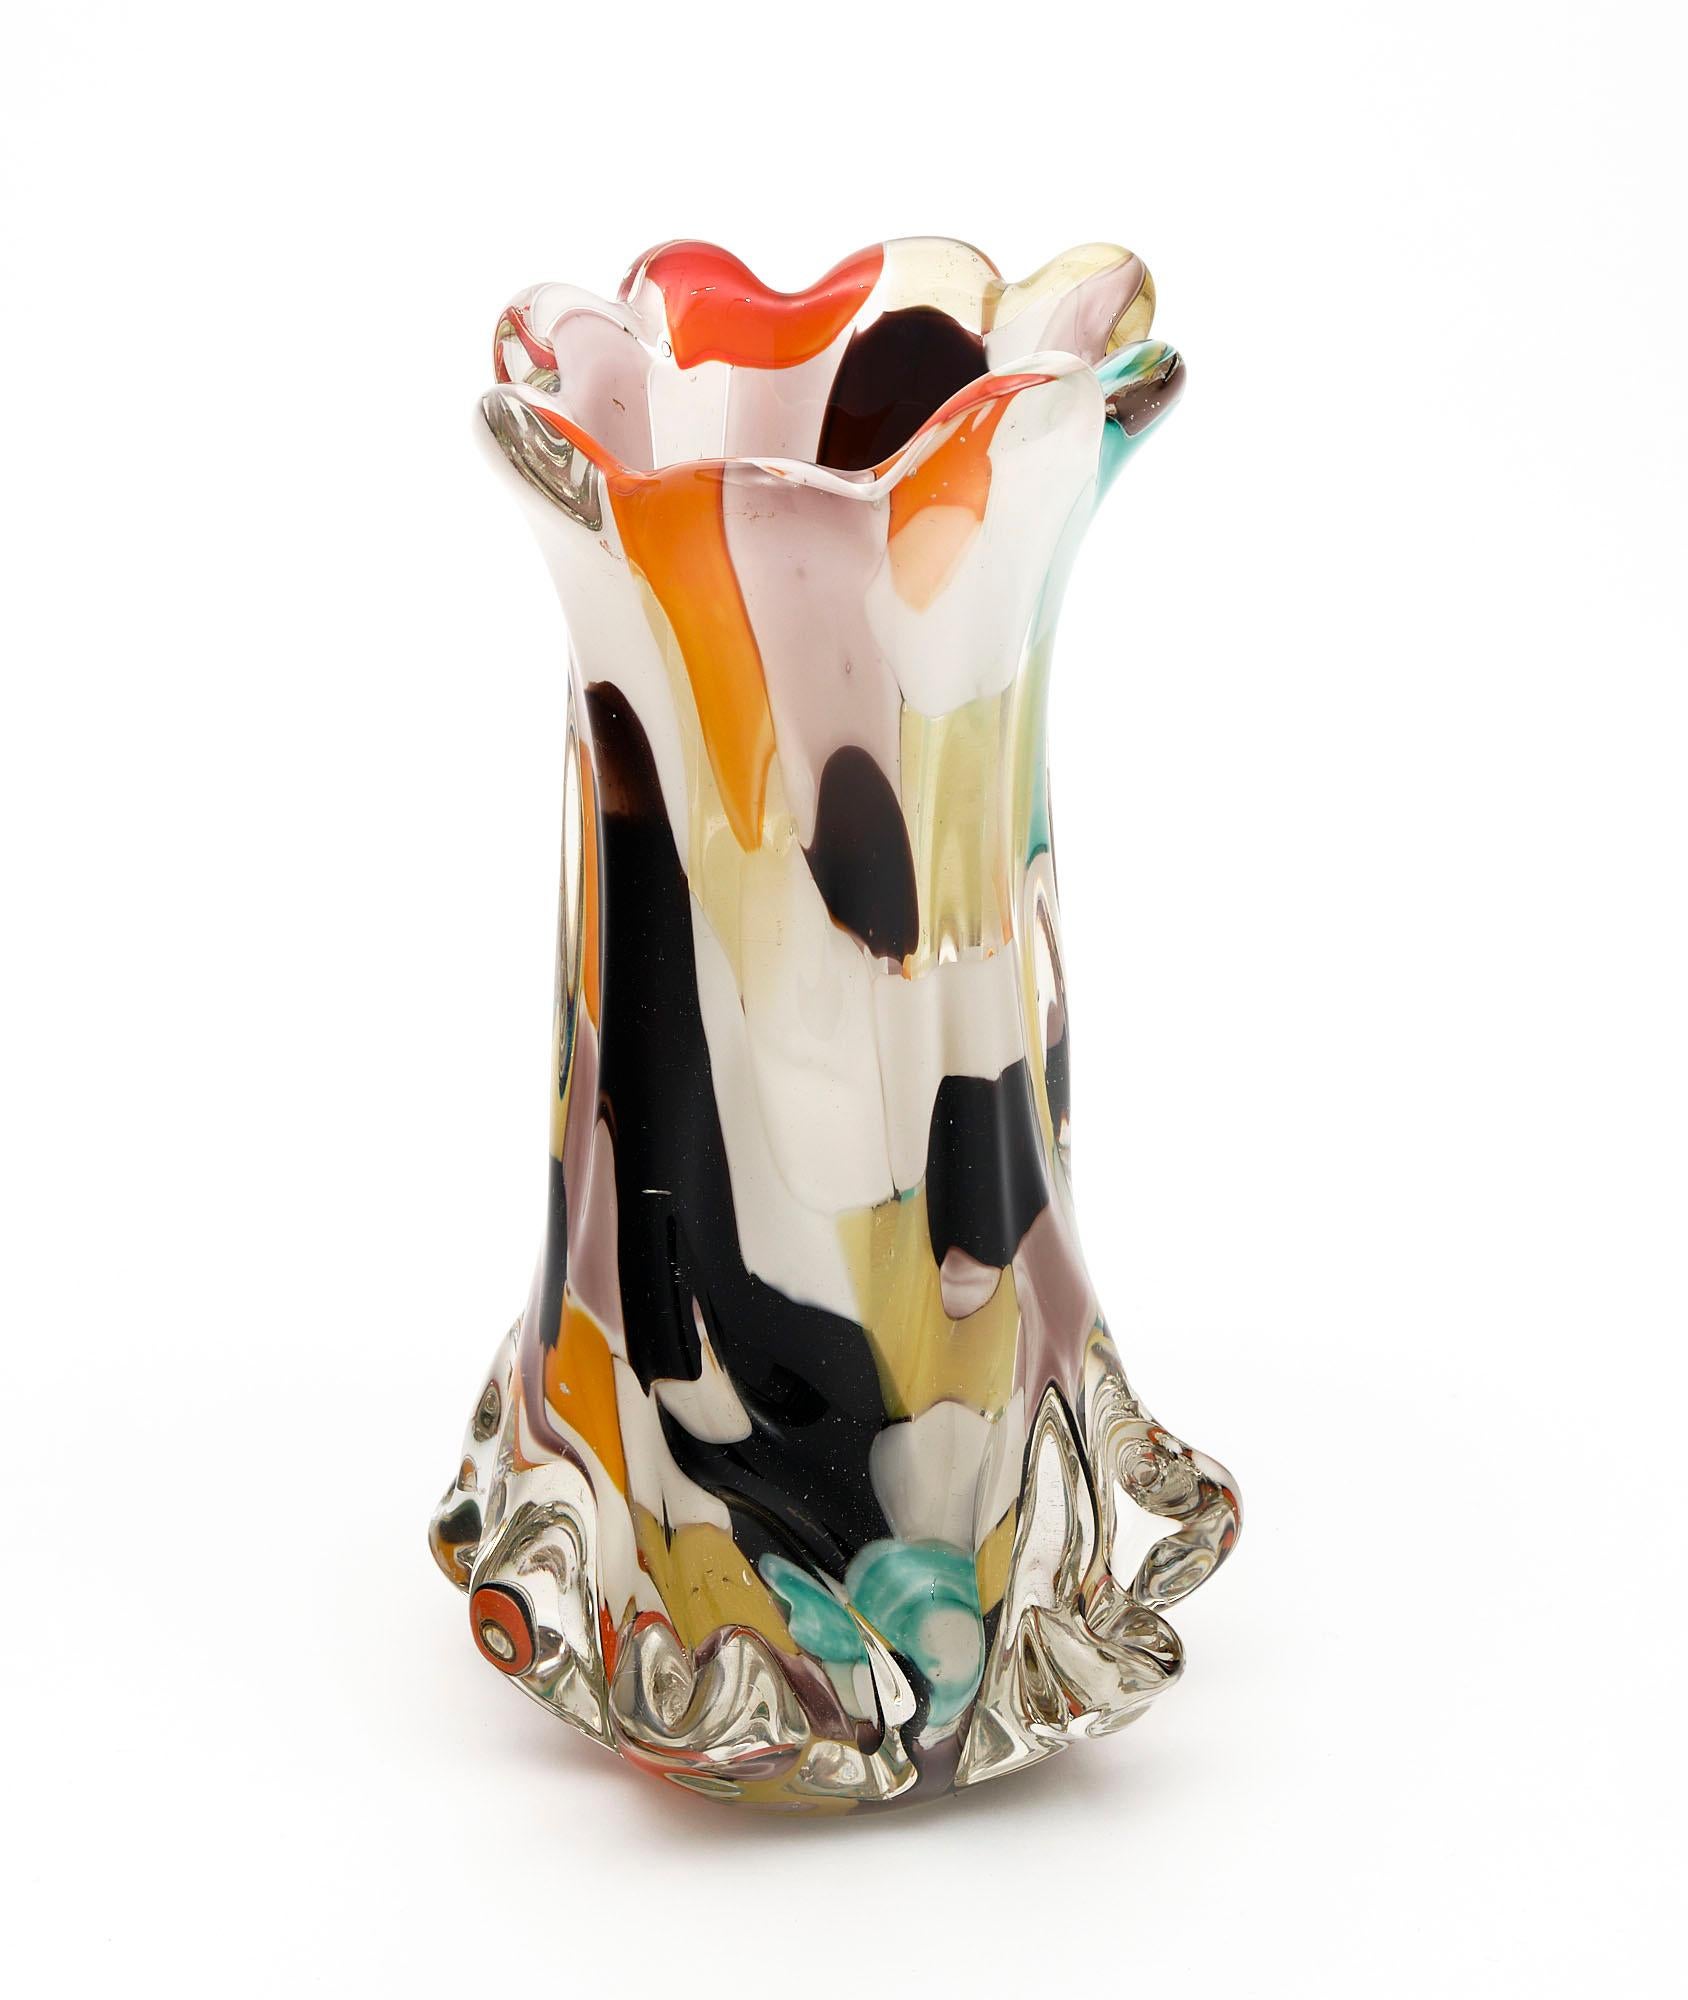 Vase from Murano made with multicolored hand-blown glass by the legendary Cenedese. Striking colors and design!